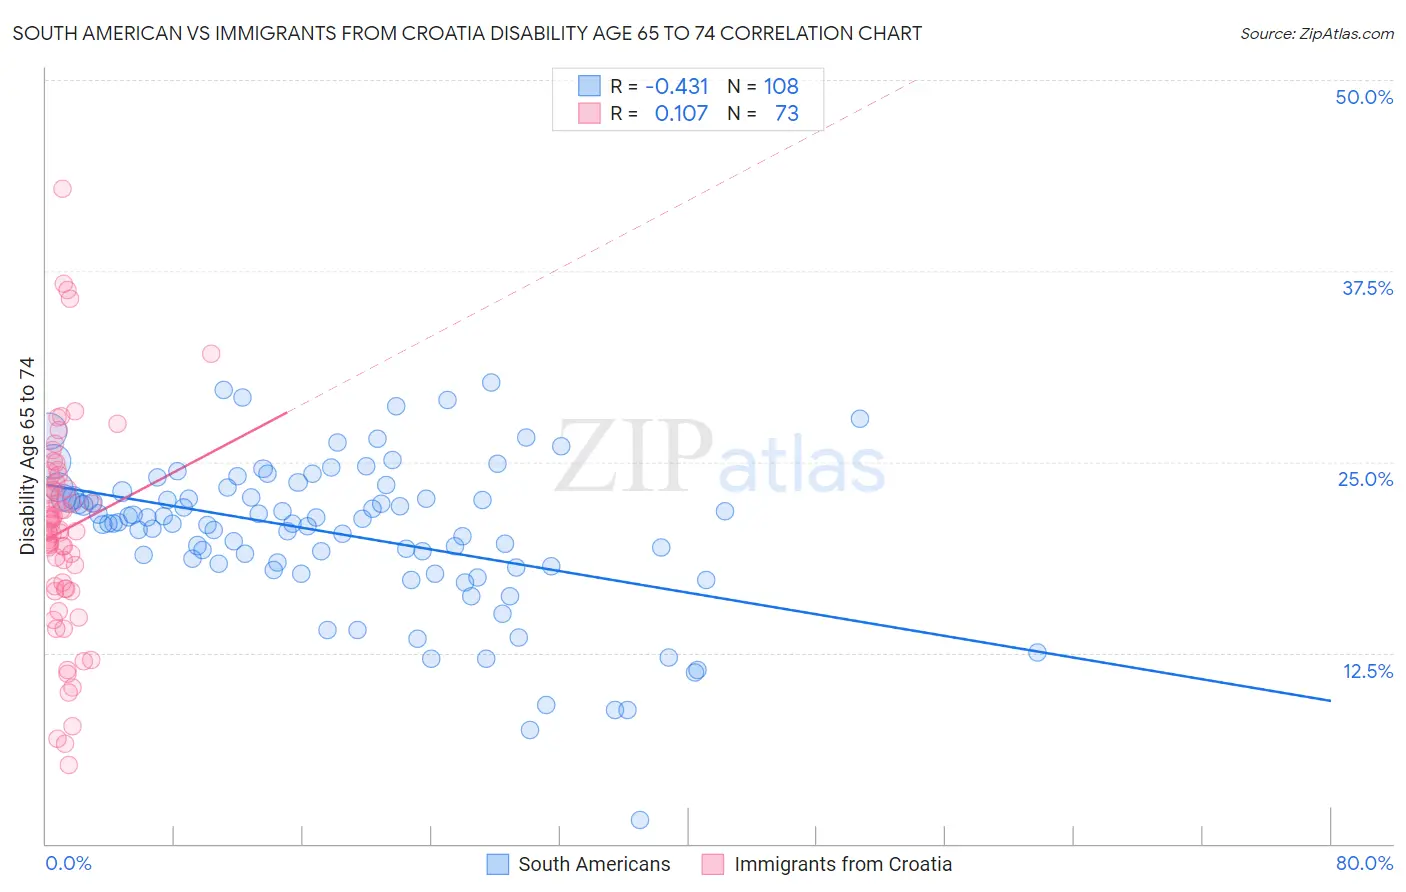 South American vs Immigrants from Croatia Disability Age 65 to 74